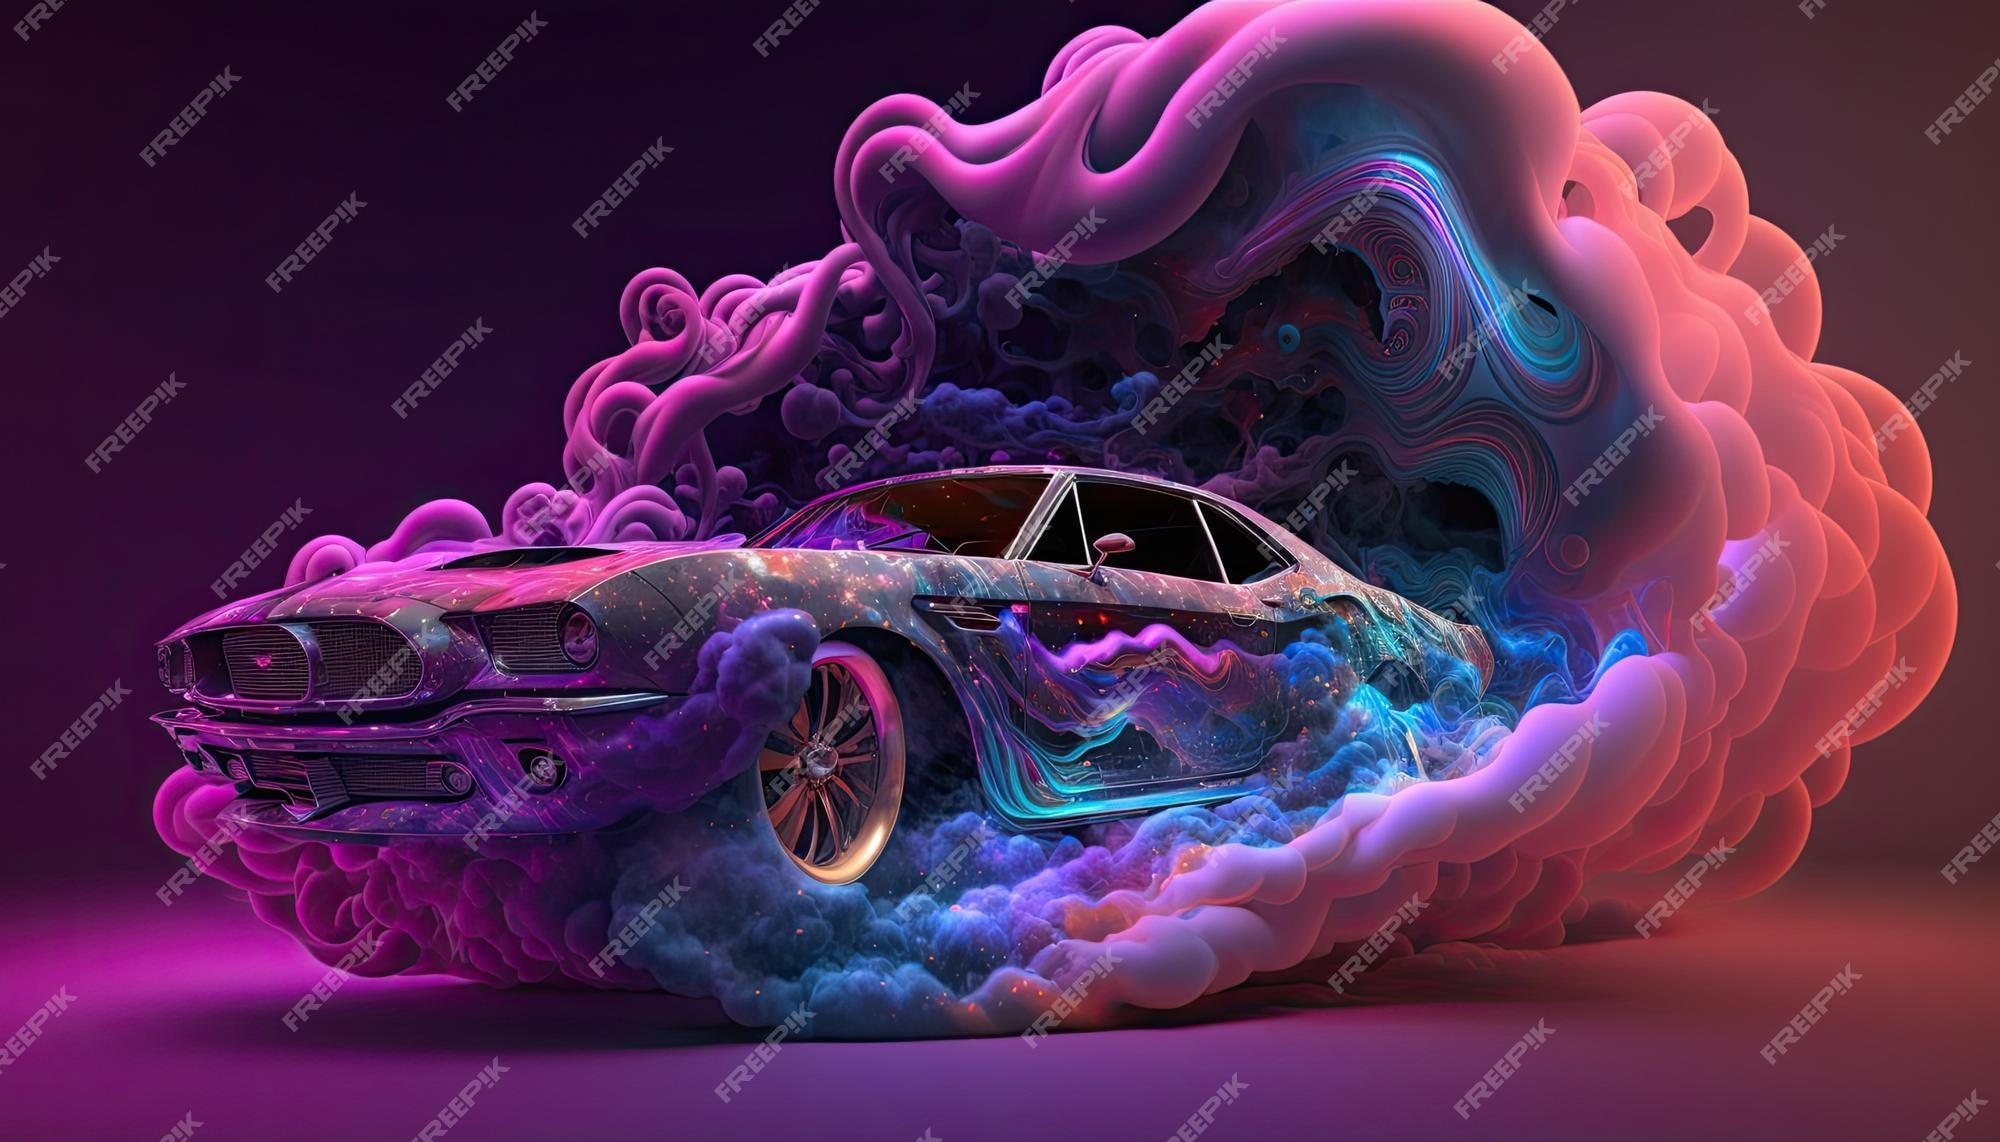 Premium Photo Wallpaper Of Mustang Car With Smoke And Galaxy